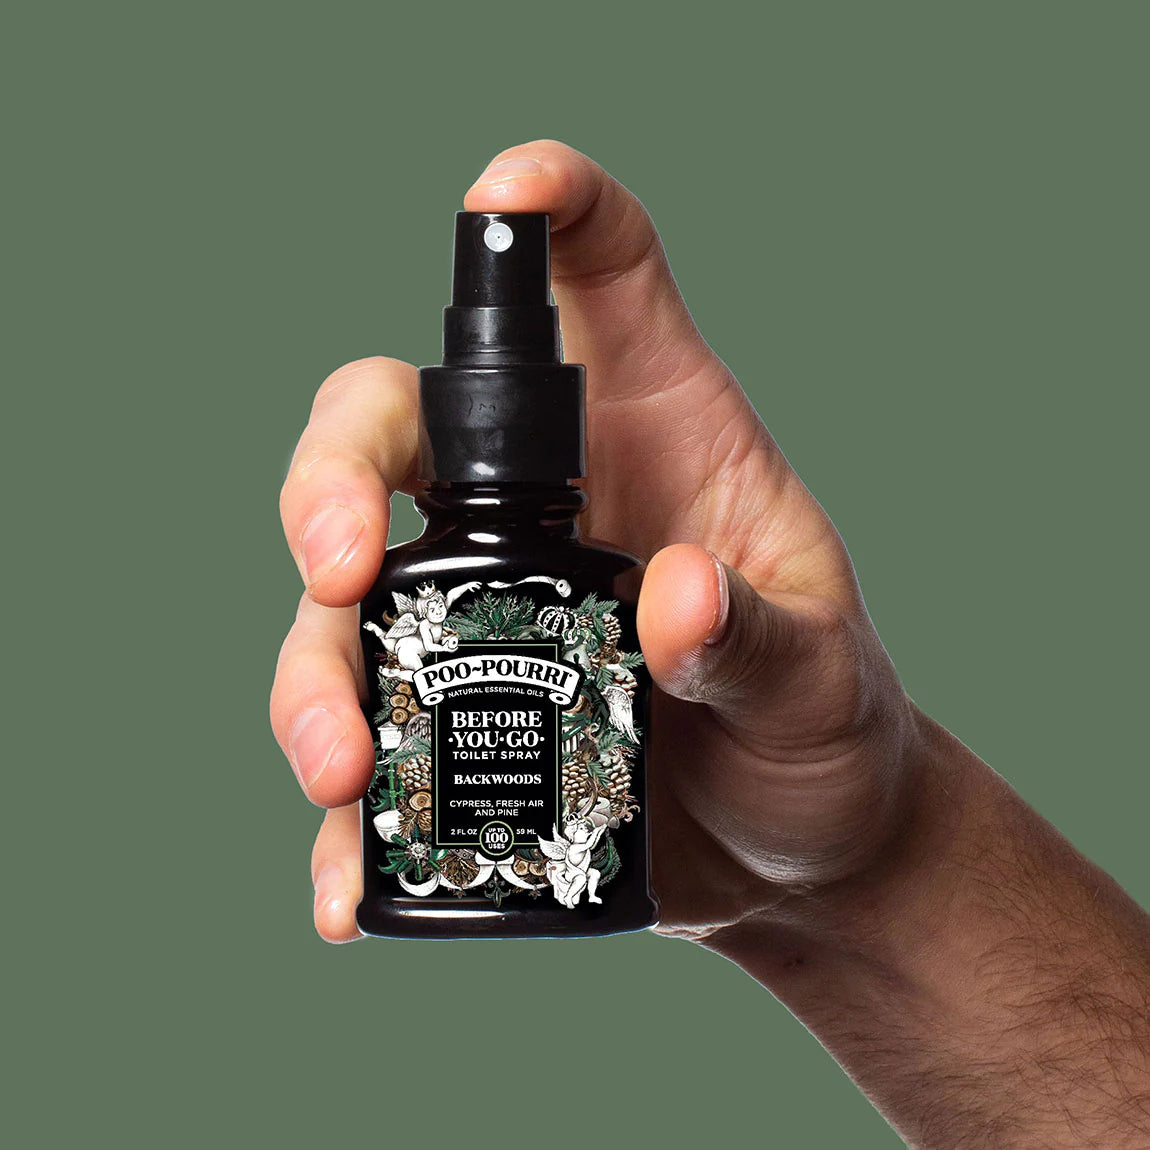 hand holding bottle of backwoods toilet spray with finger on the pump.